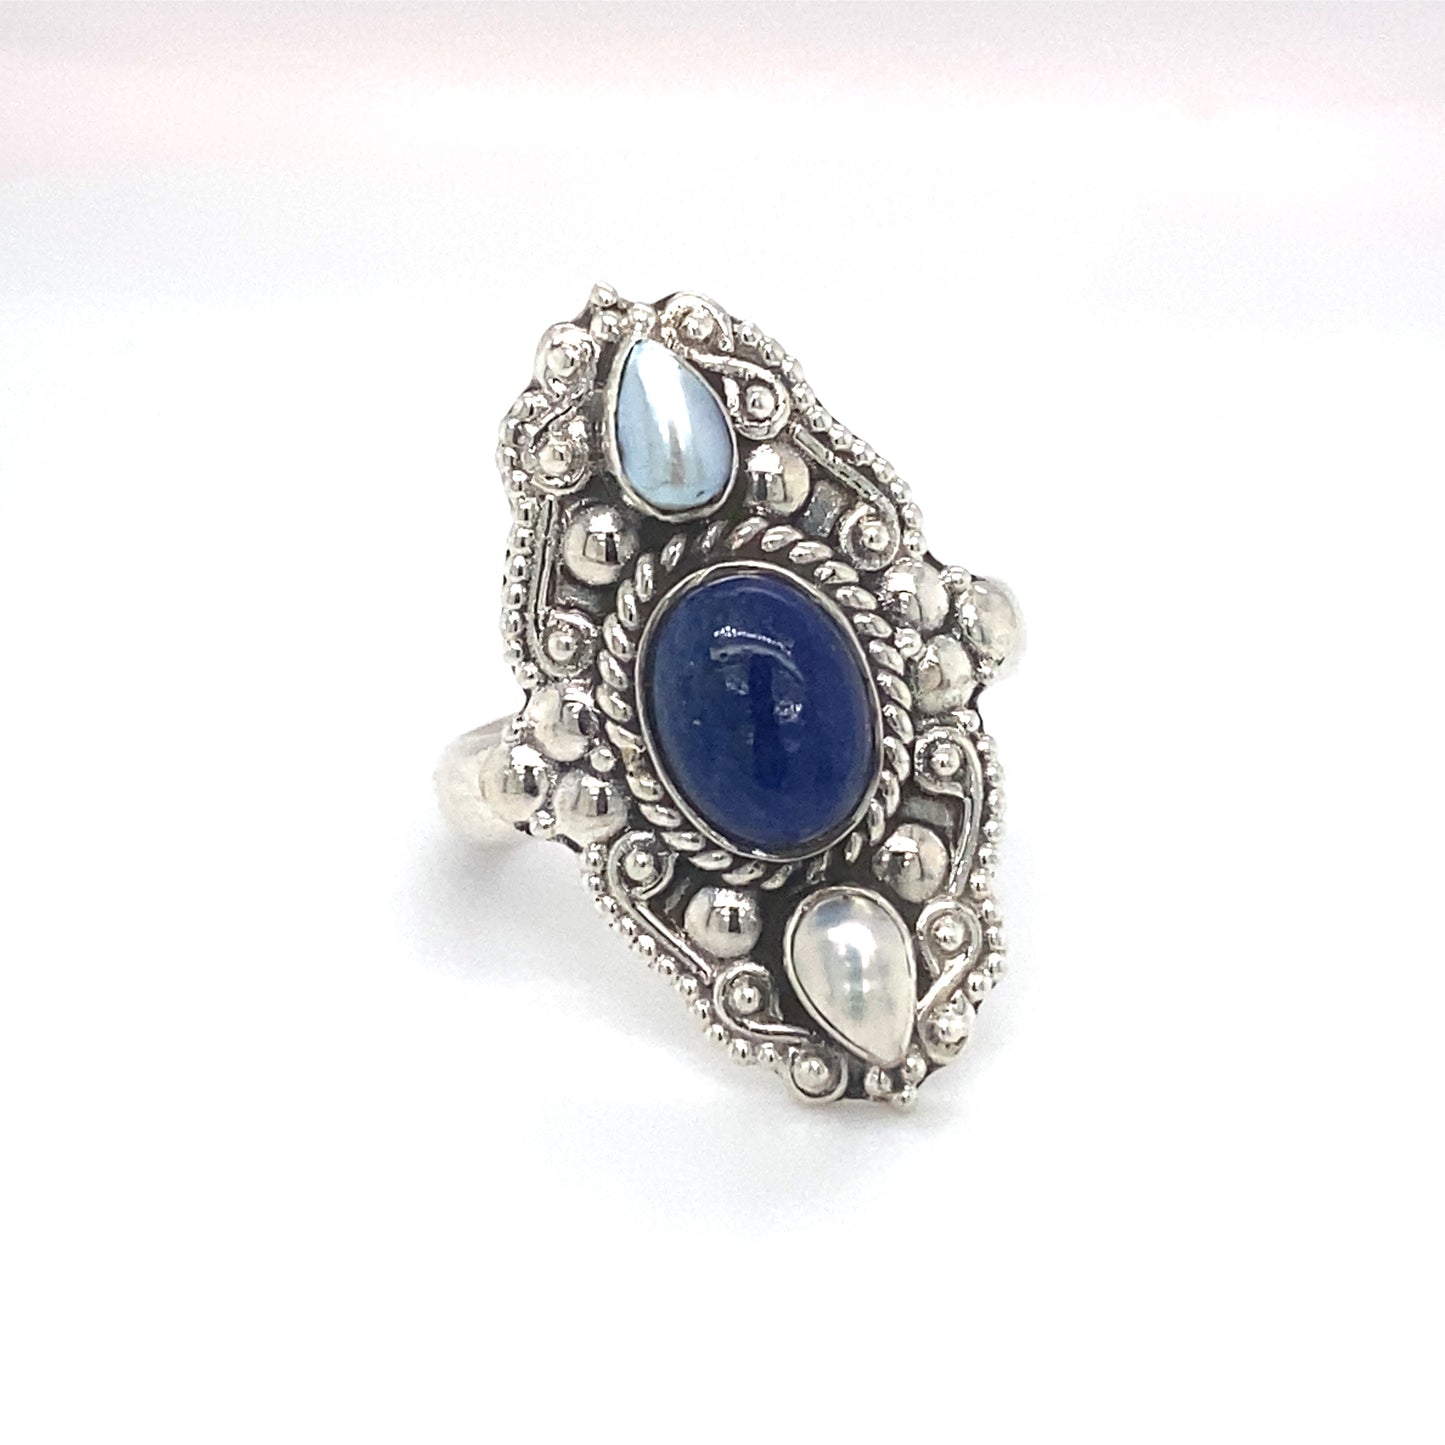 Circa 1990s Lapis Lazuli and Baroque Pearl Ring in Sterling Silver